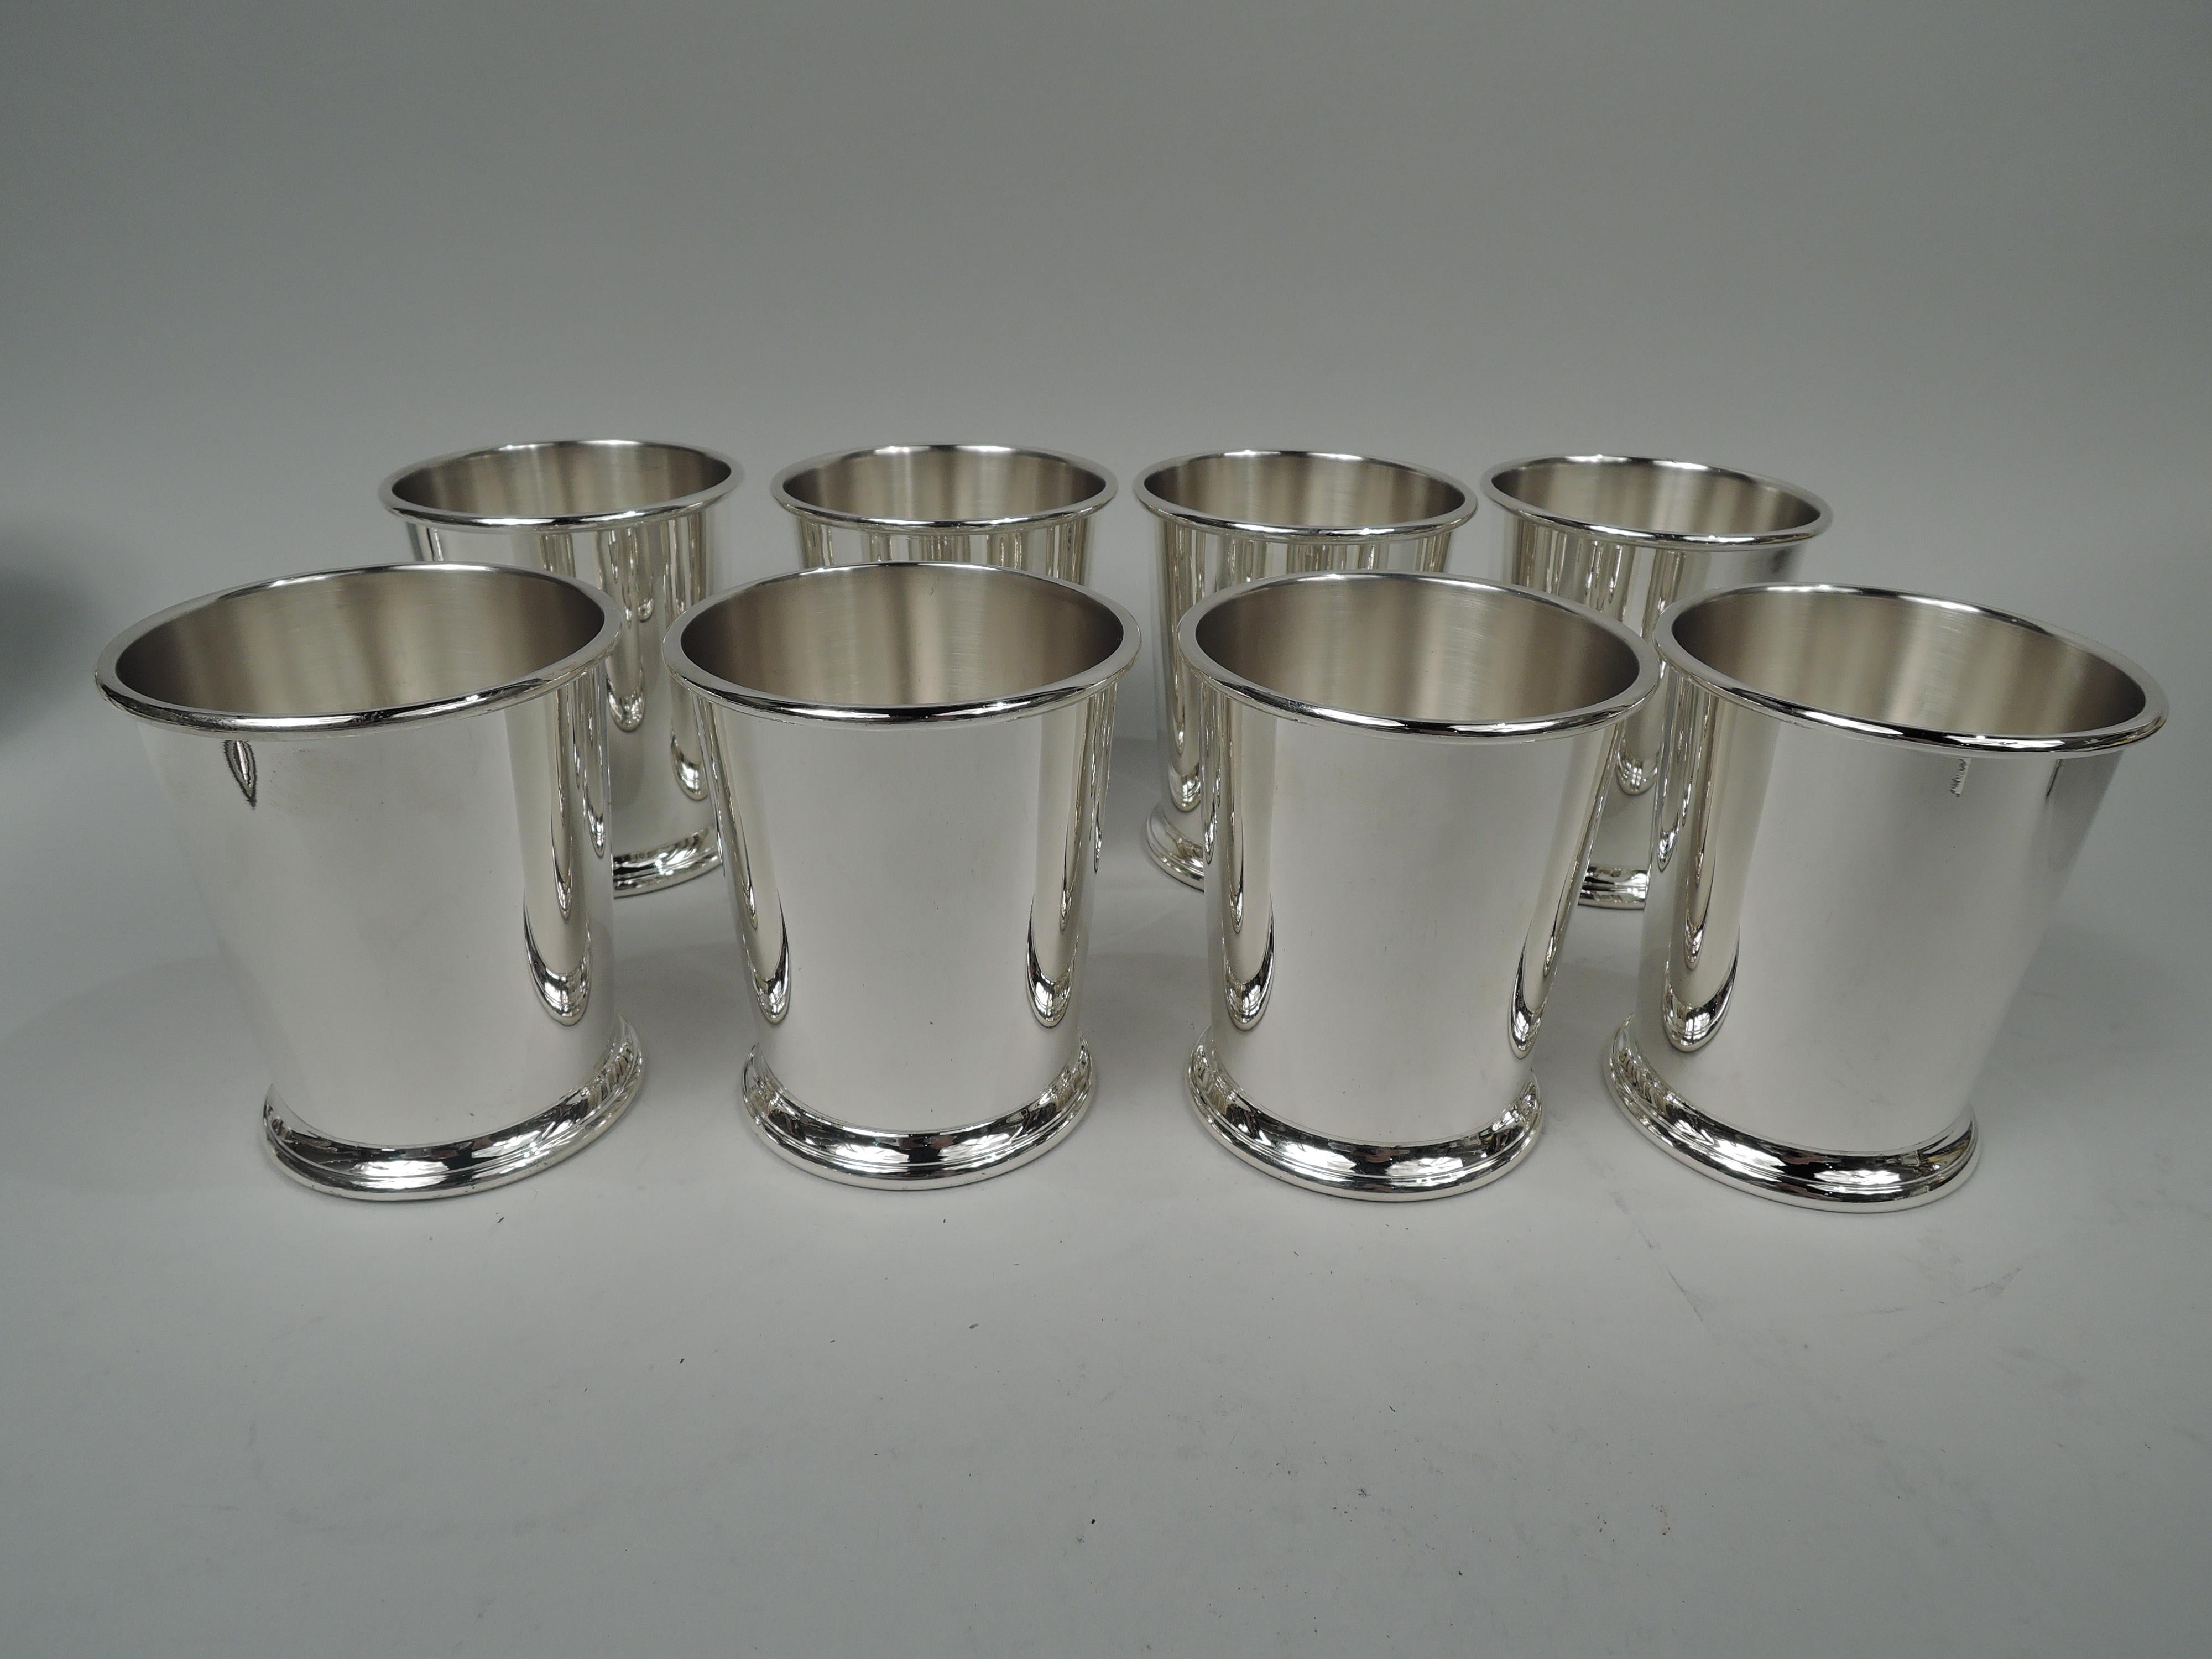 Set of 8 American sterling silver mint juleps. Each: Straight and tapering sides, molded mouth rim, and skirted foot. Marked “Sterling / 0040”. Total weight: 38 troy ounces. 